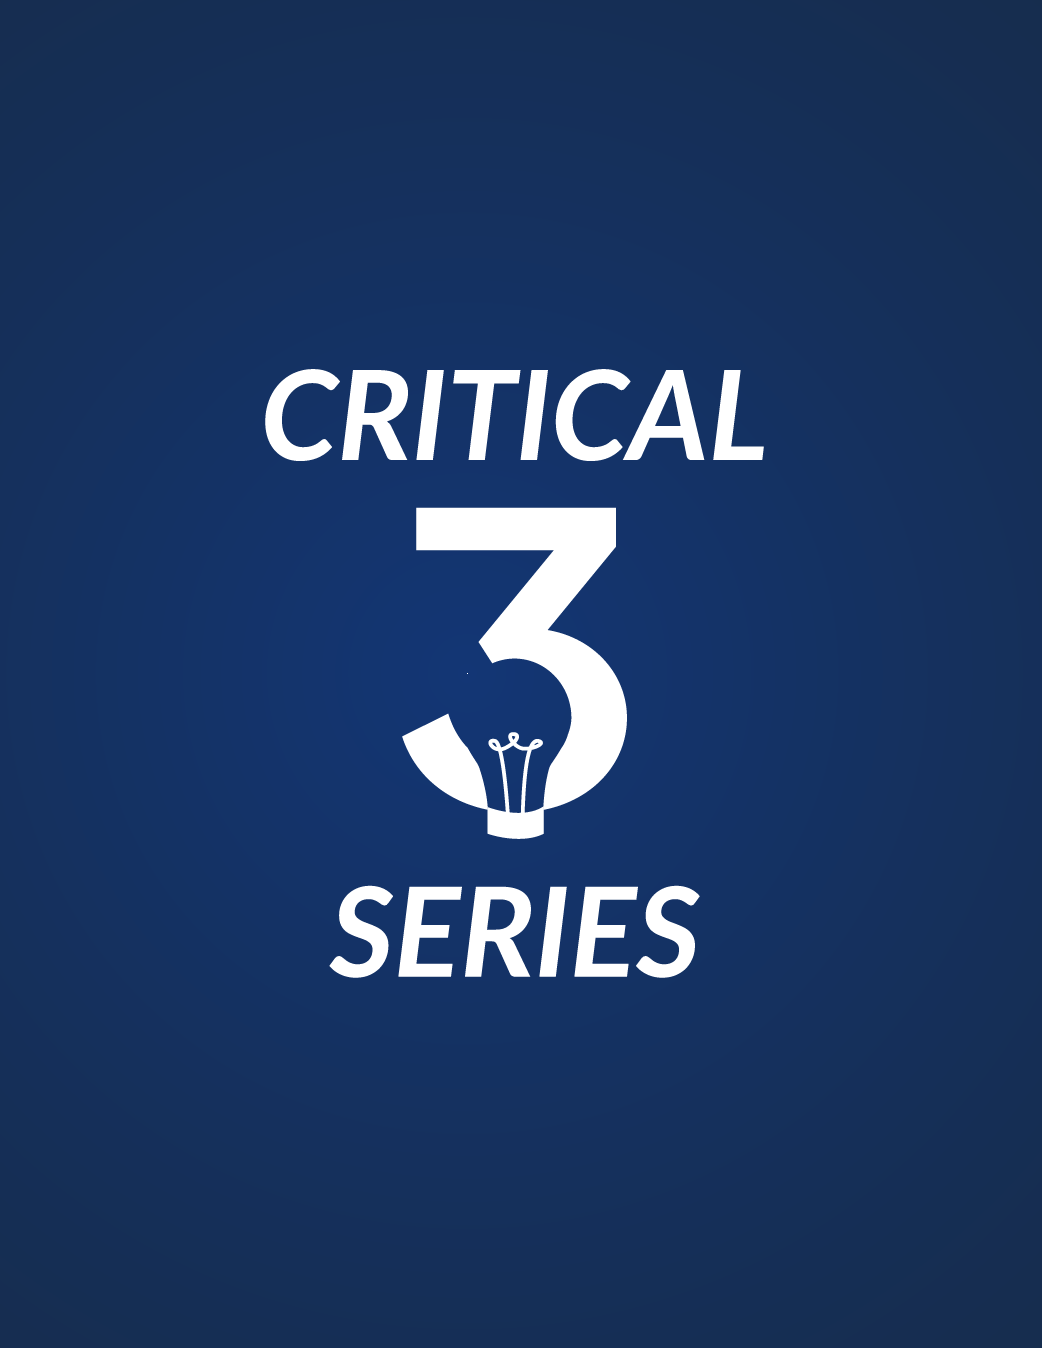 Critical 3: 3 Ways to Improve Court Security Image